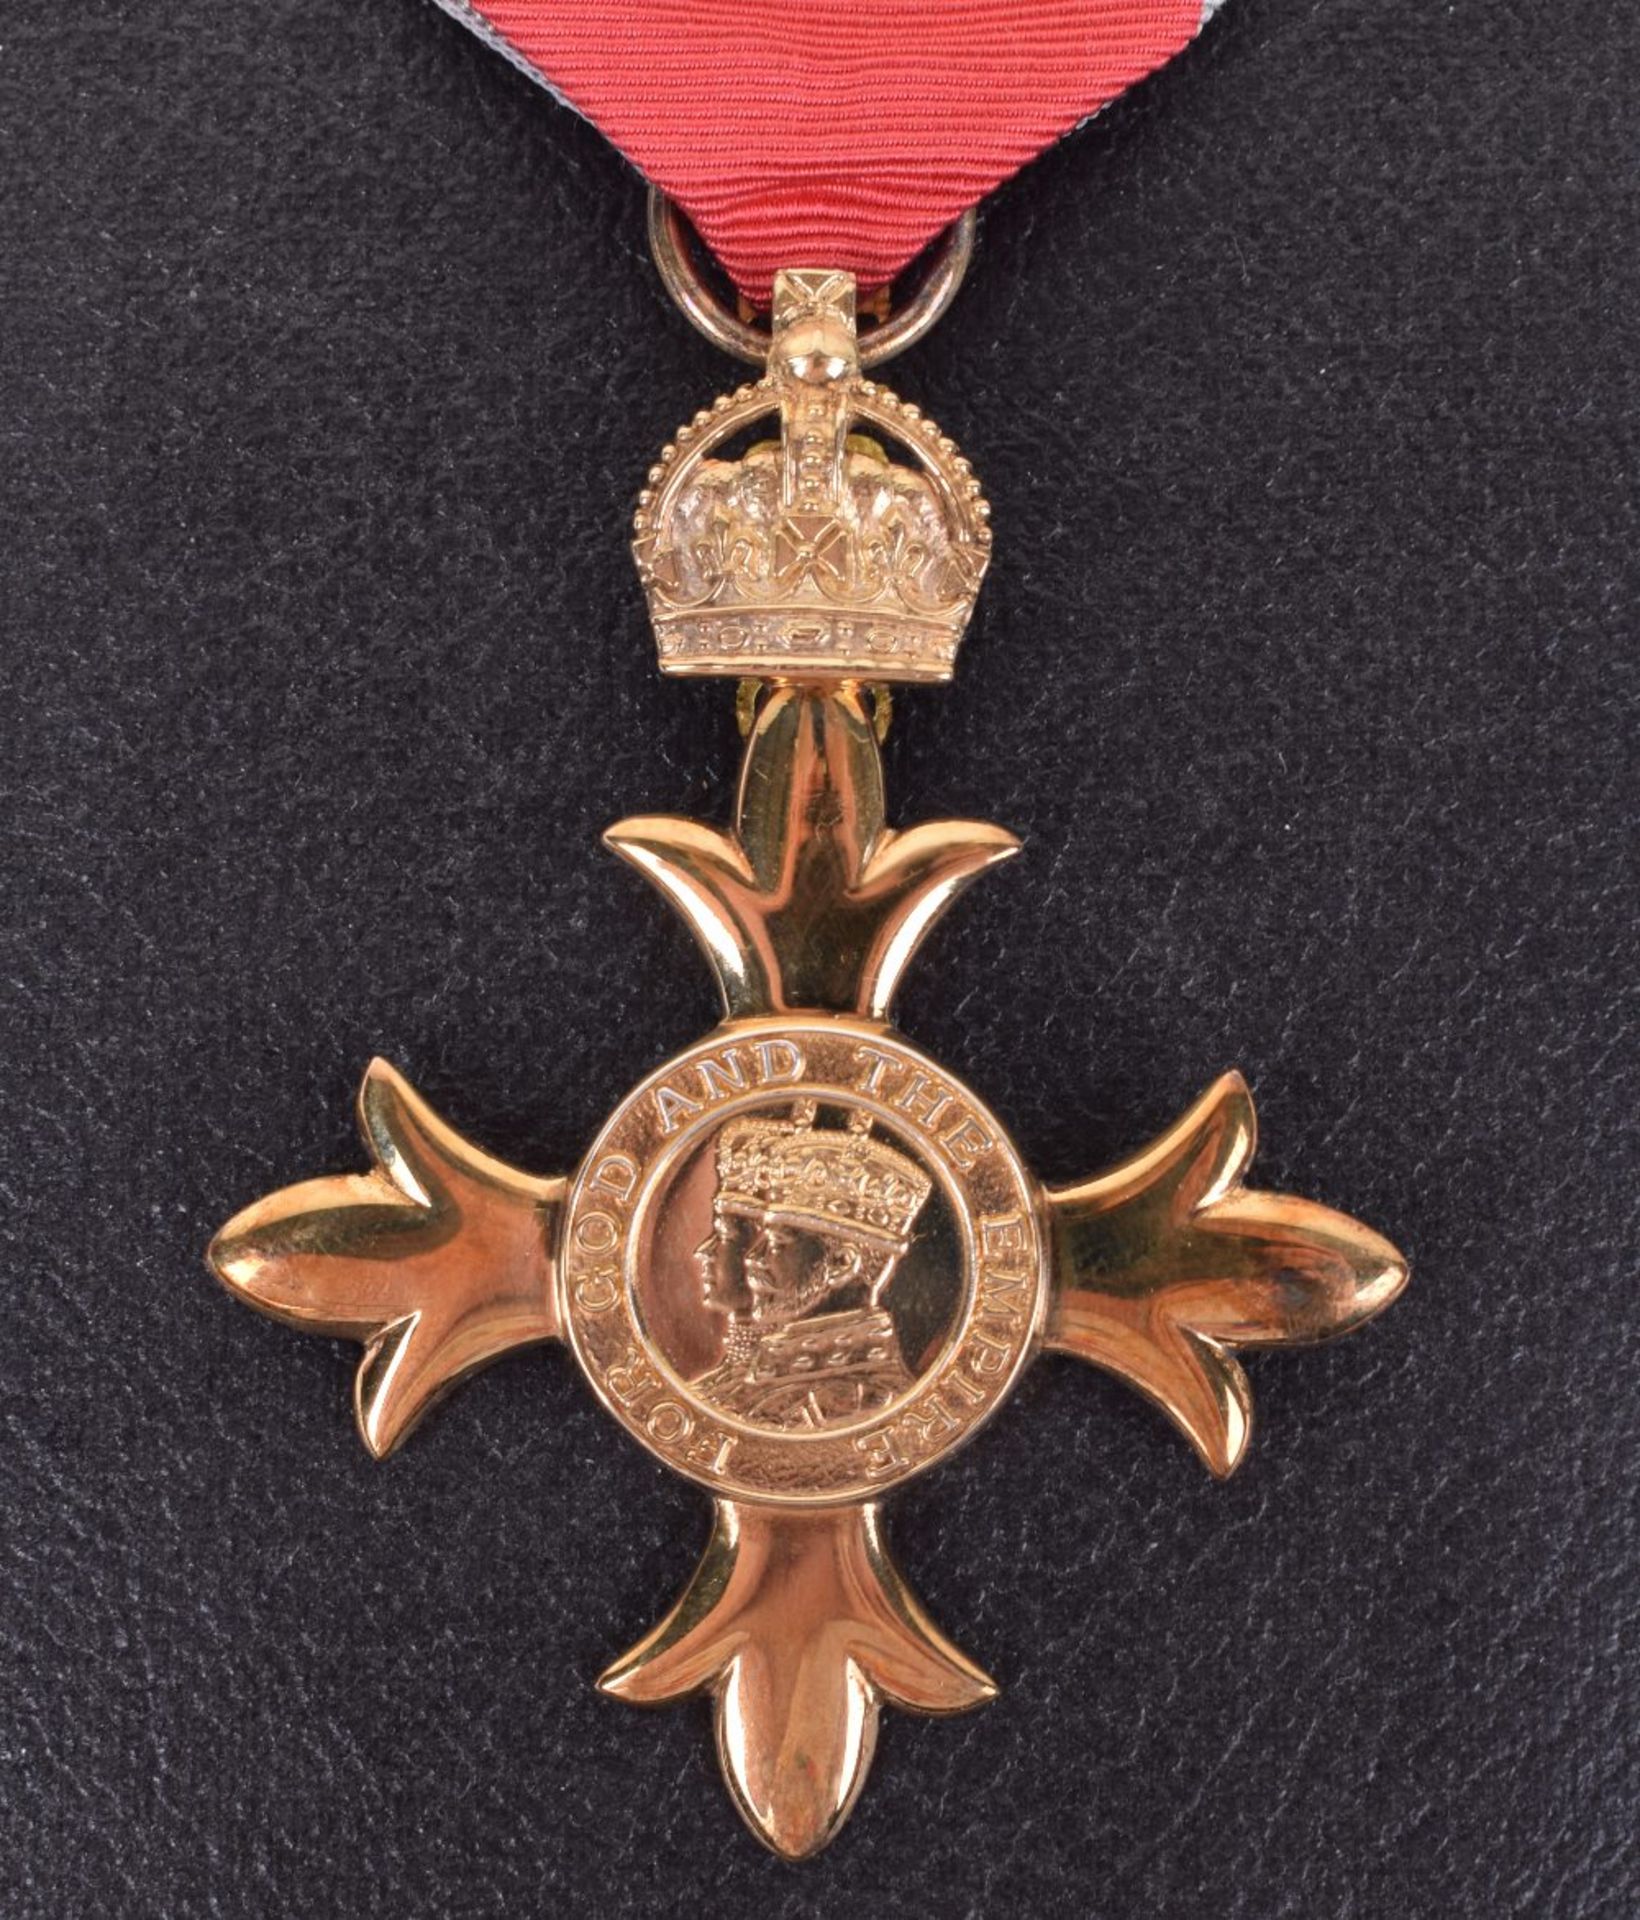 Officer of the Most Excellent Order of the British Empire (O.B.E) Medal - Image 2 of 4